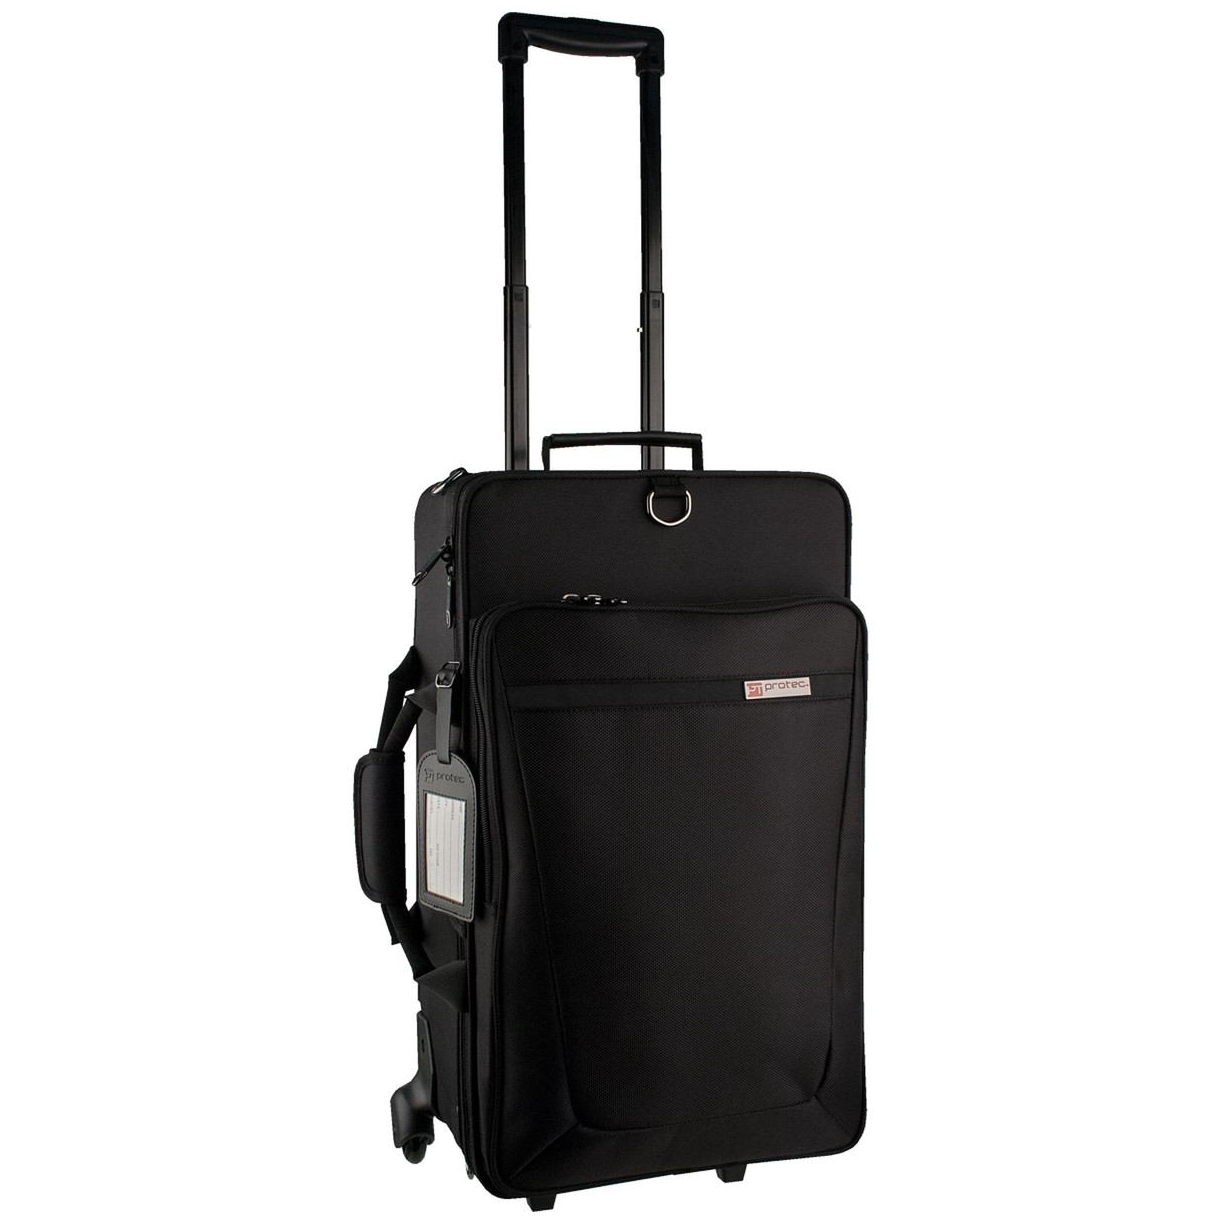 Protec Protec PB-301VAX Doppelkoffer-Trolley